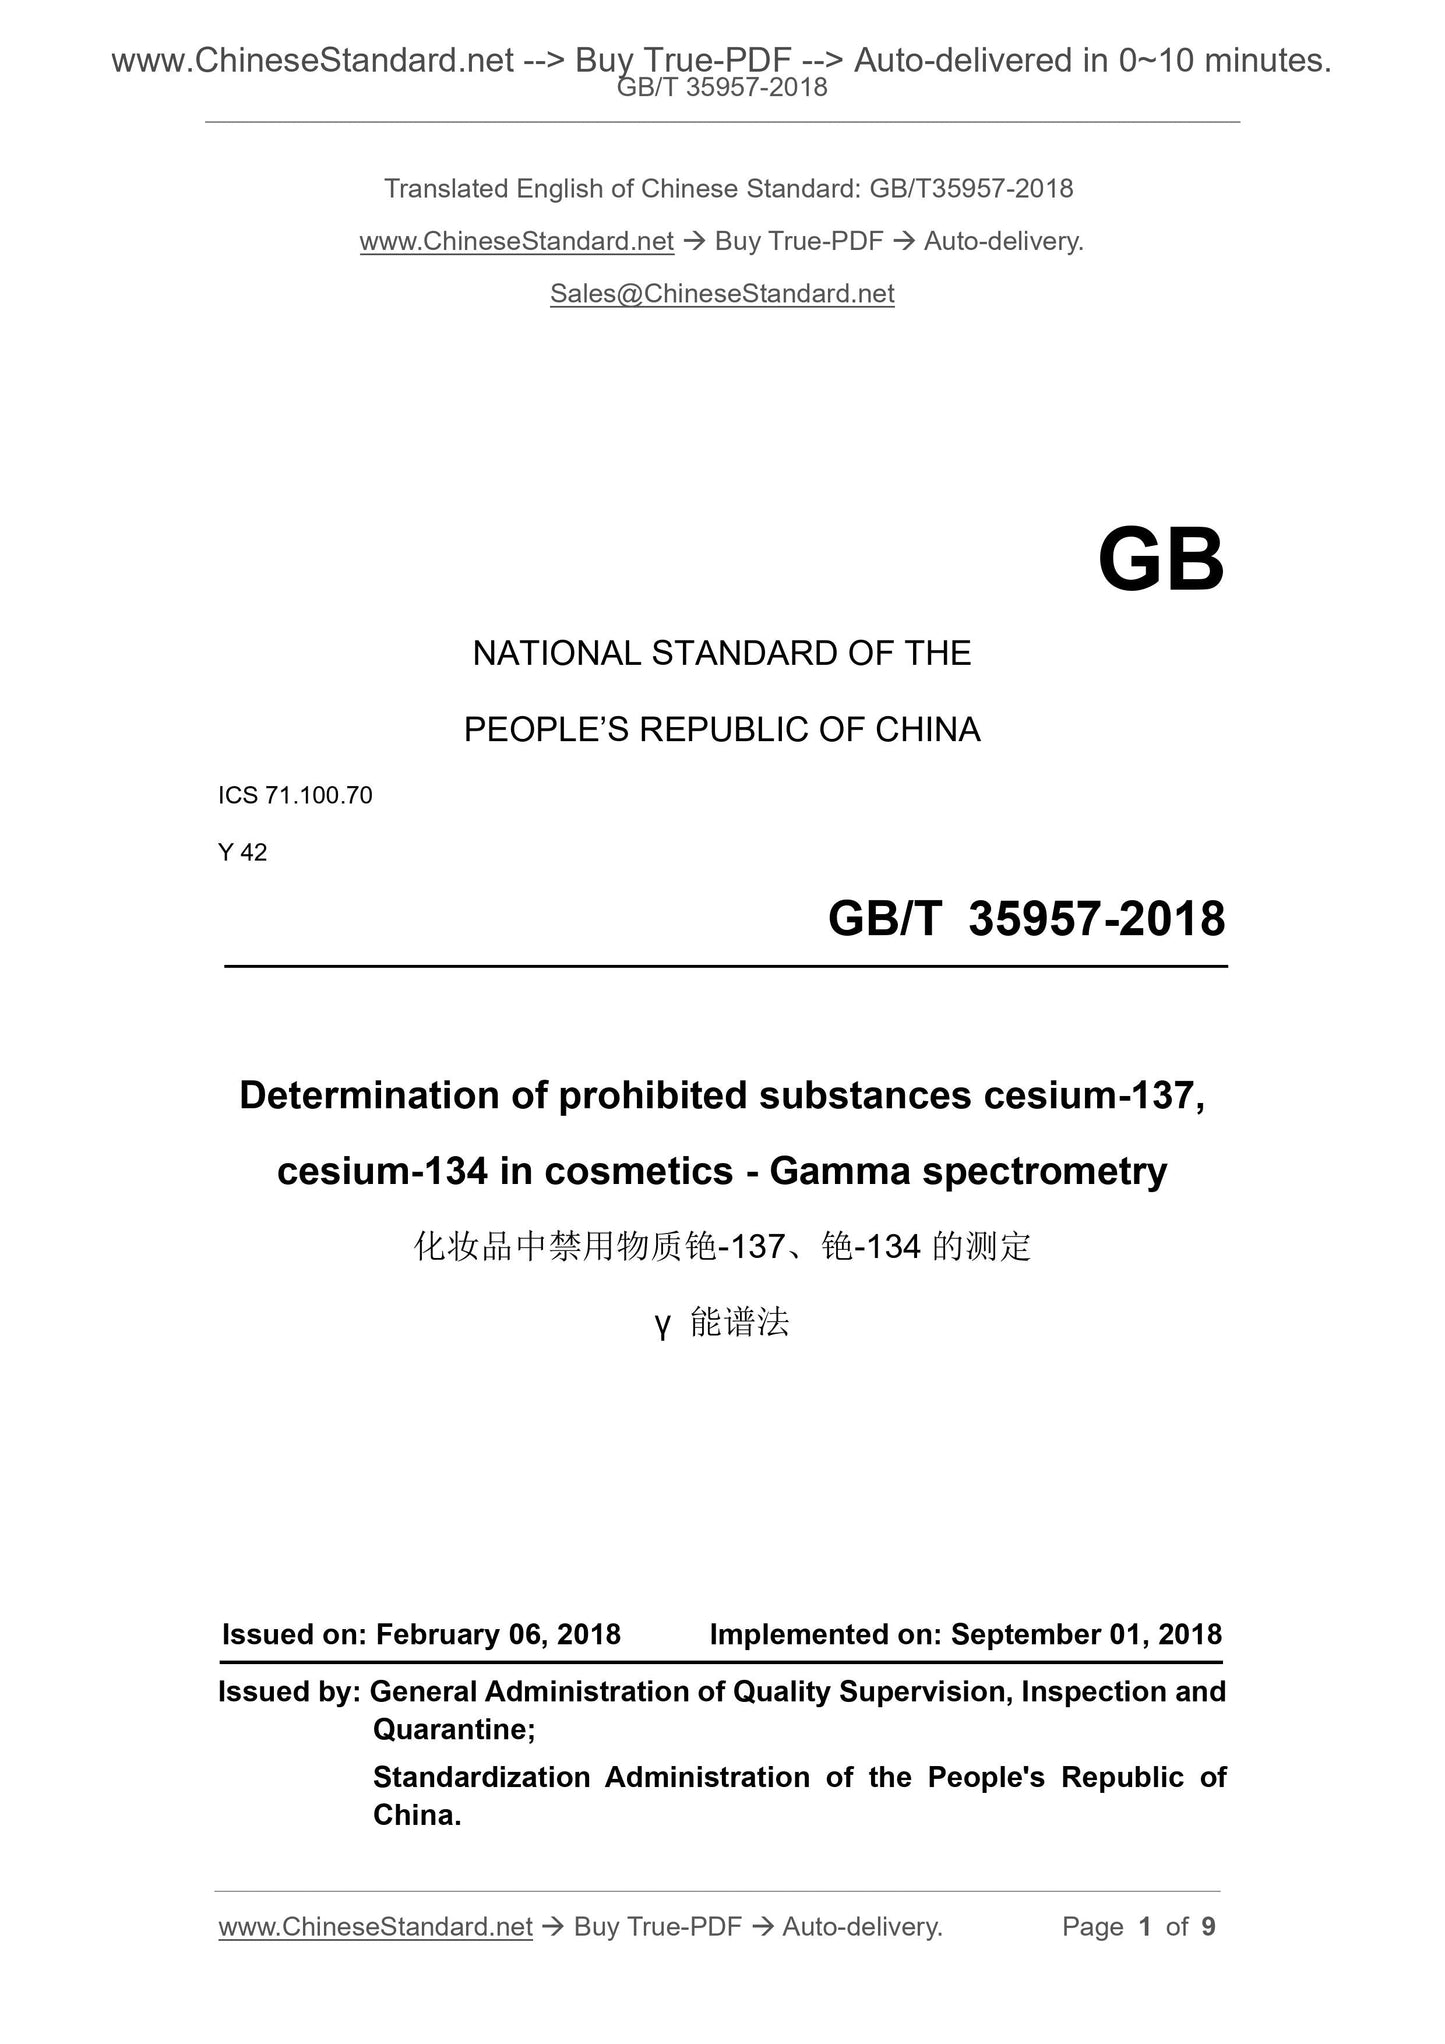 GB/T 35957-2018 Page 1